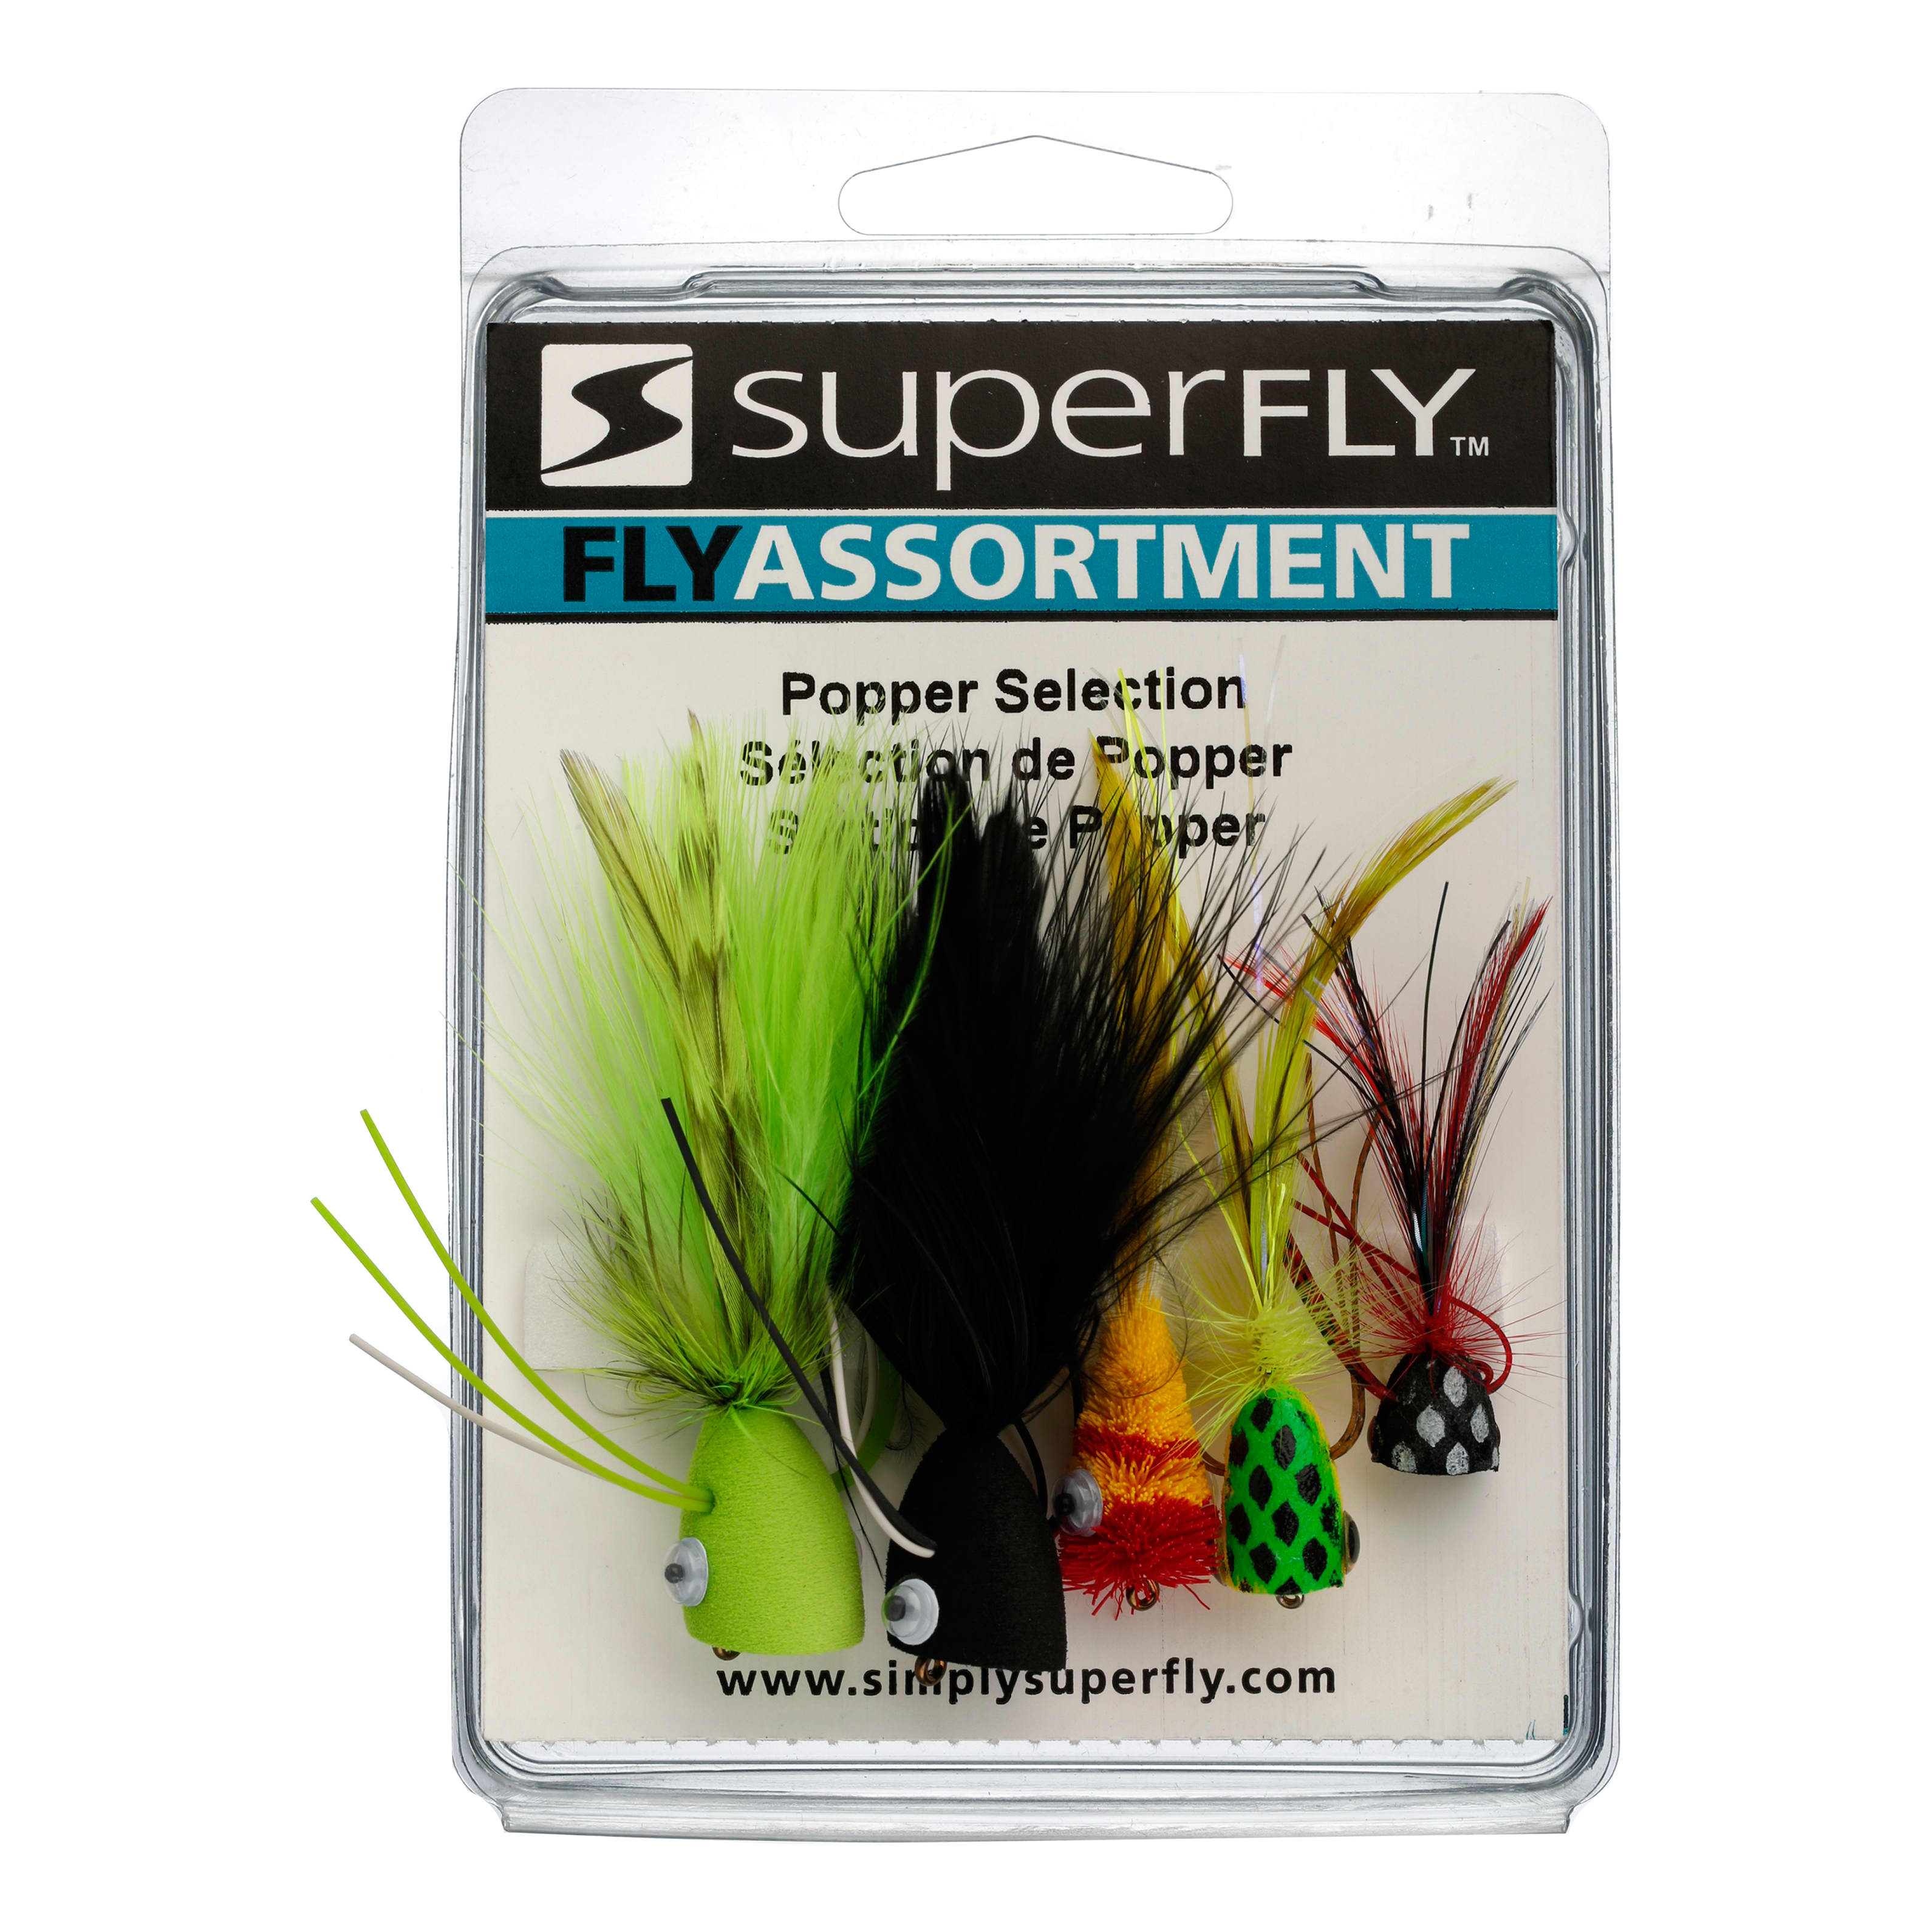 Superfly Premium Popper Selection